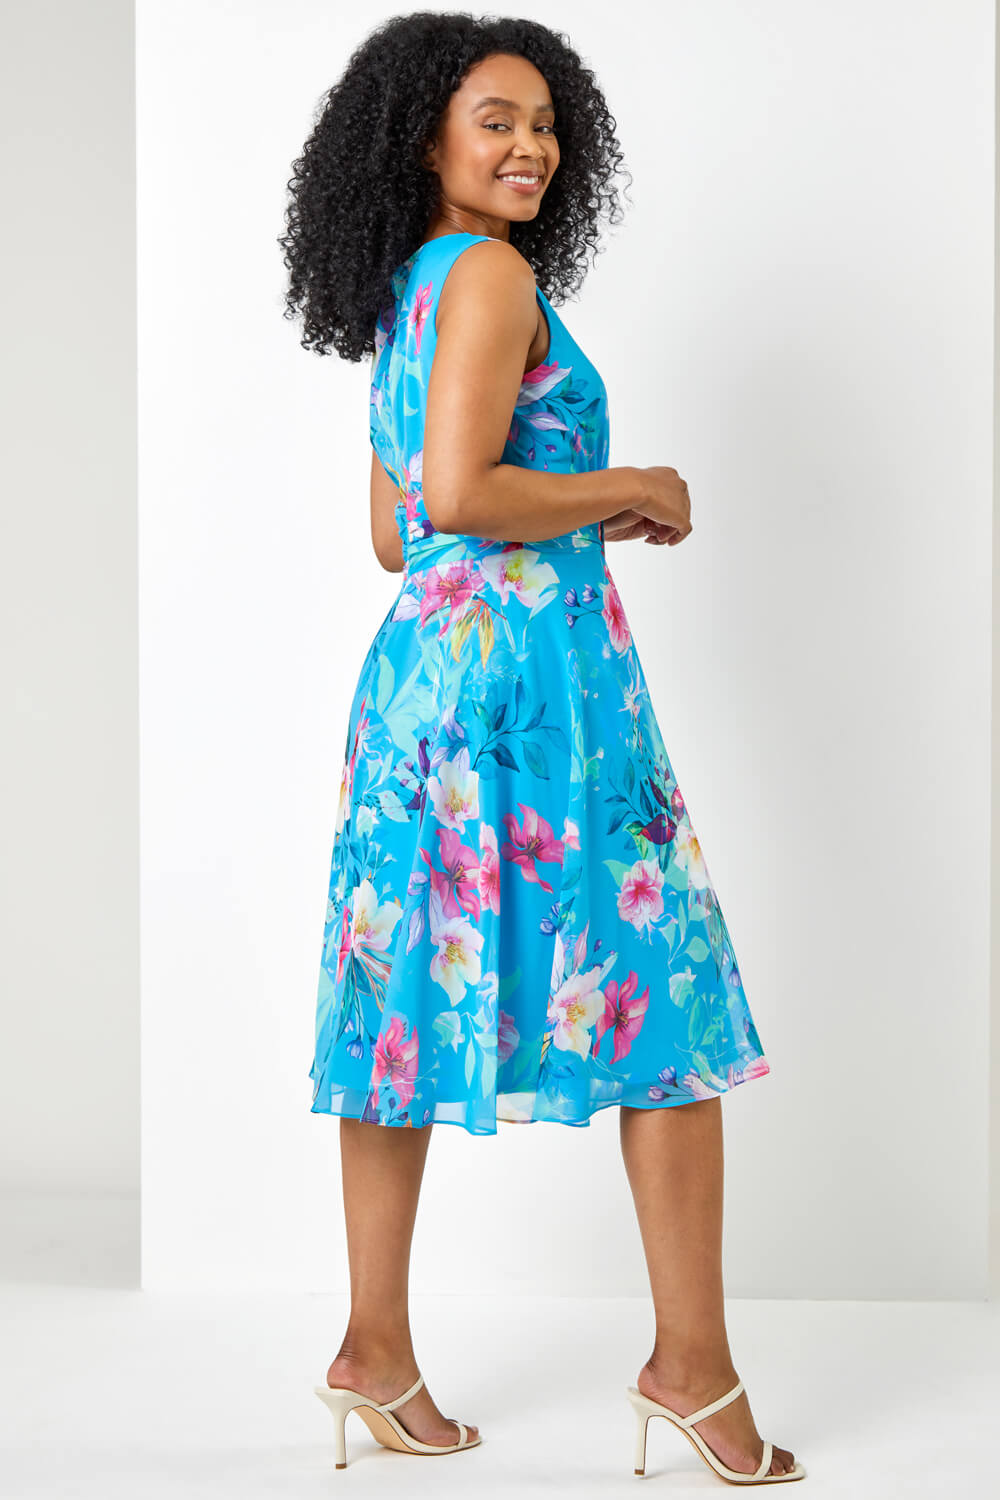 Turquoise Petite Floral Print Buckle Detail Dress, Image 2 of 5